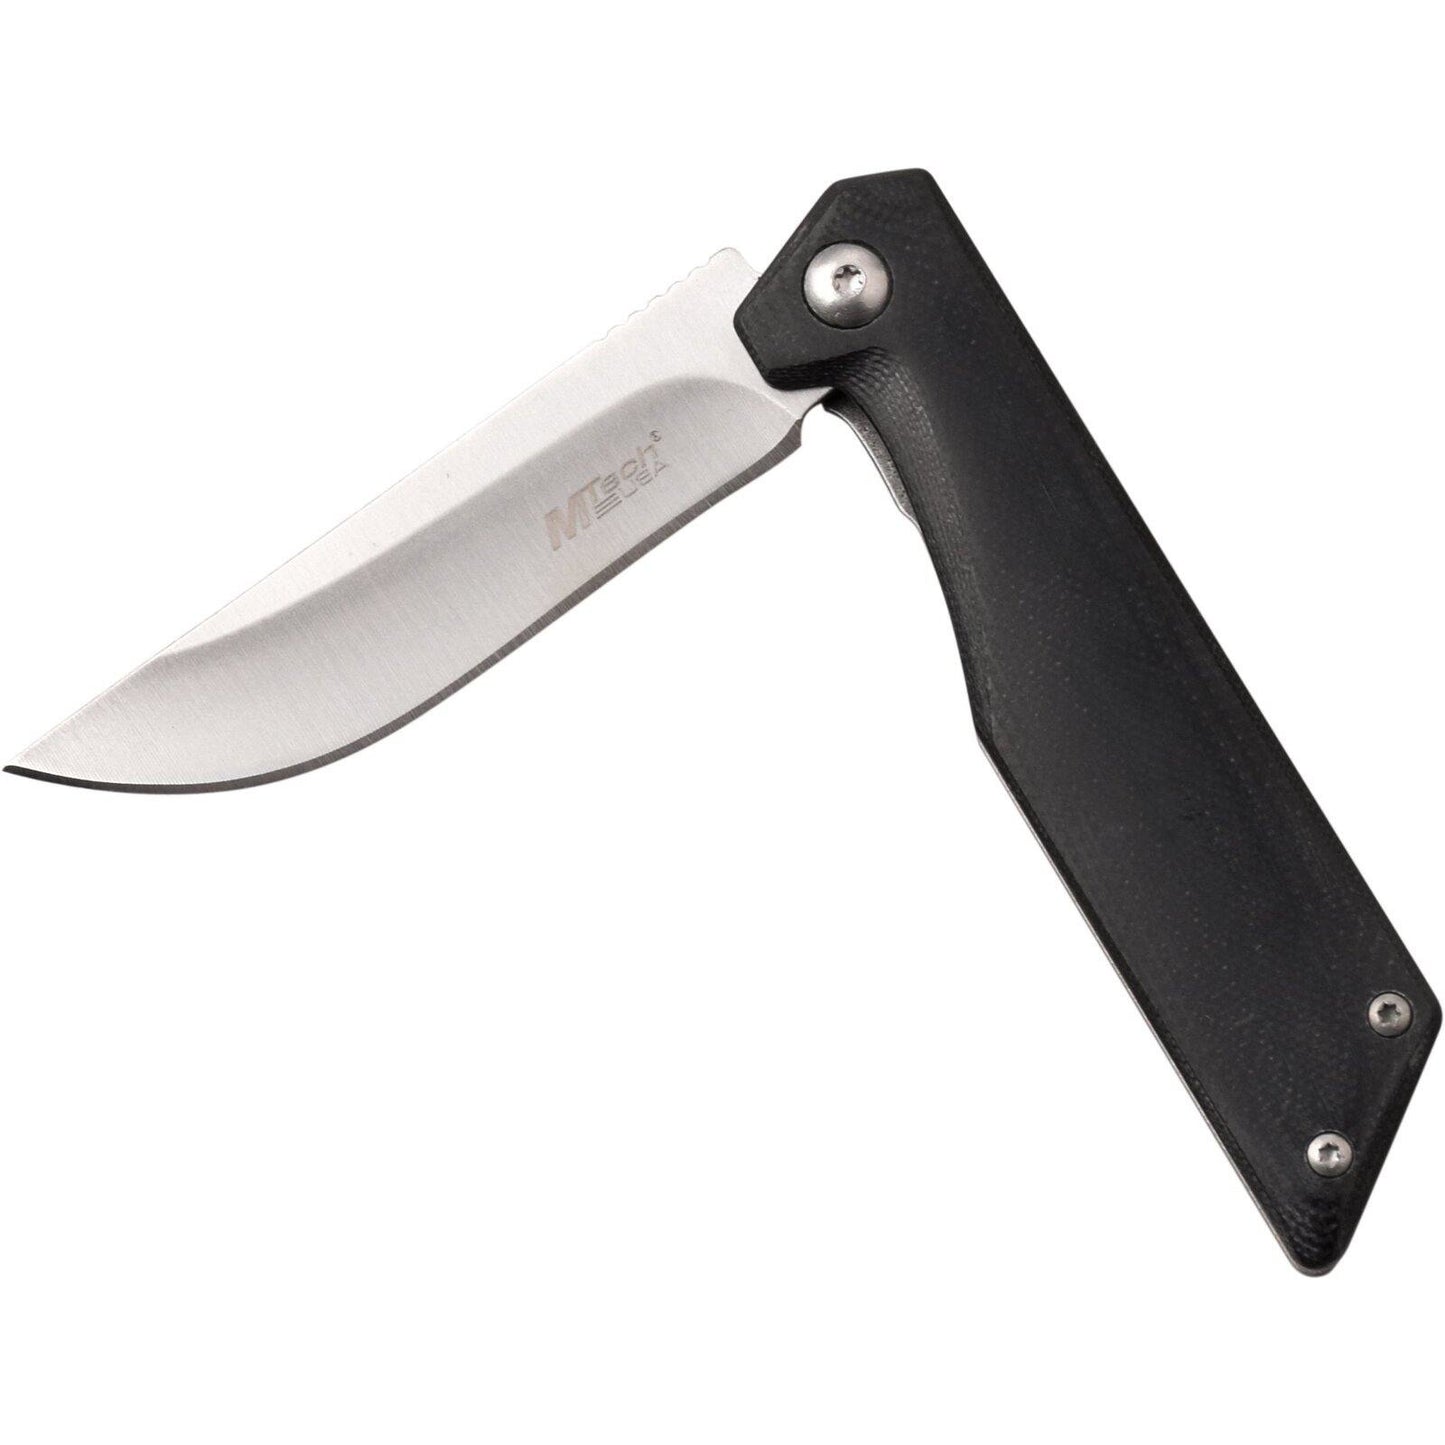 Mtech Drop Point Fine Edge Blade Folding Knife - 7 Inches Overall G10 Handle #mt-1160Ld - Xhunter New Zealand